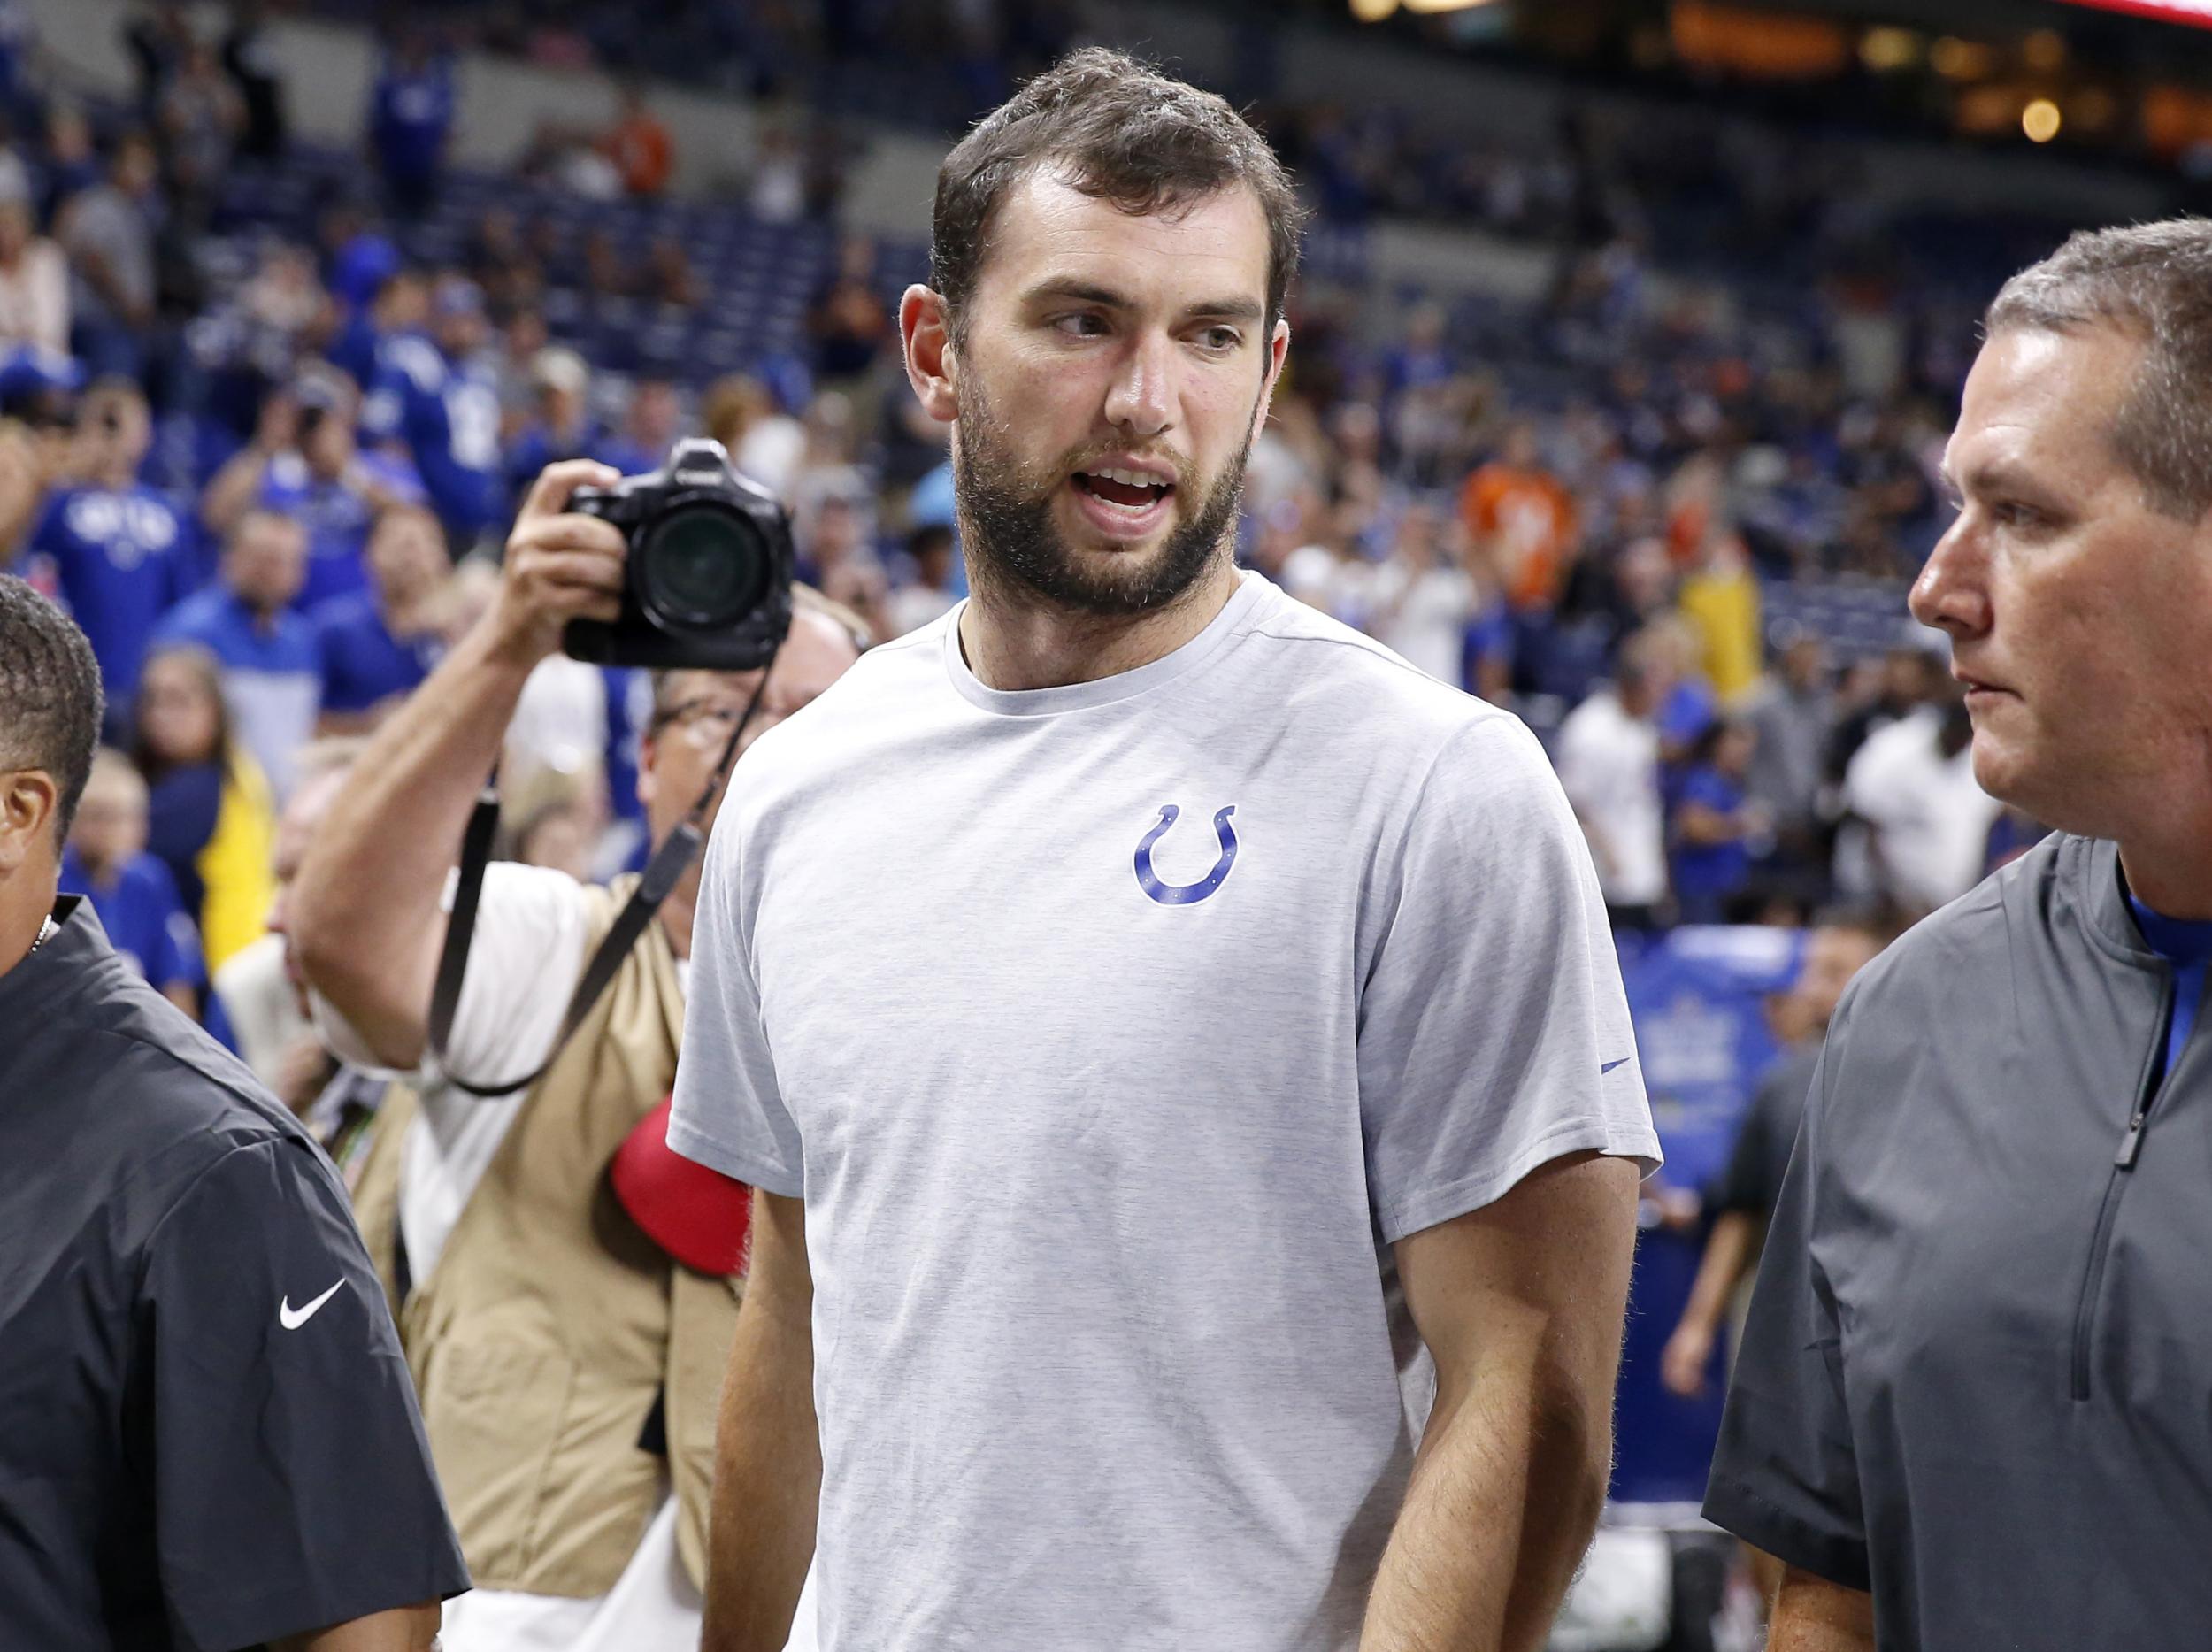 Andrew Luck has decided to retire